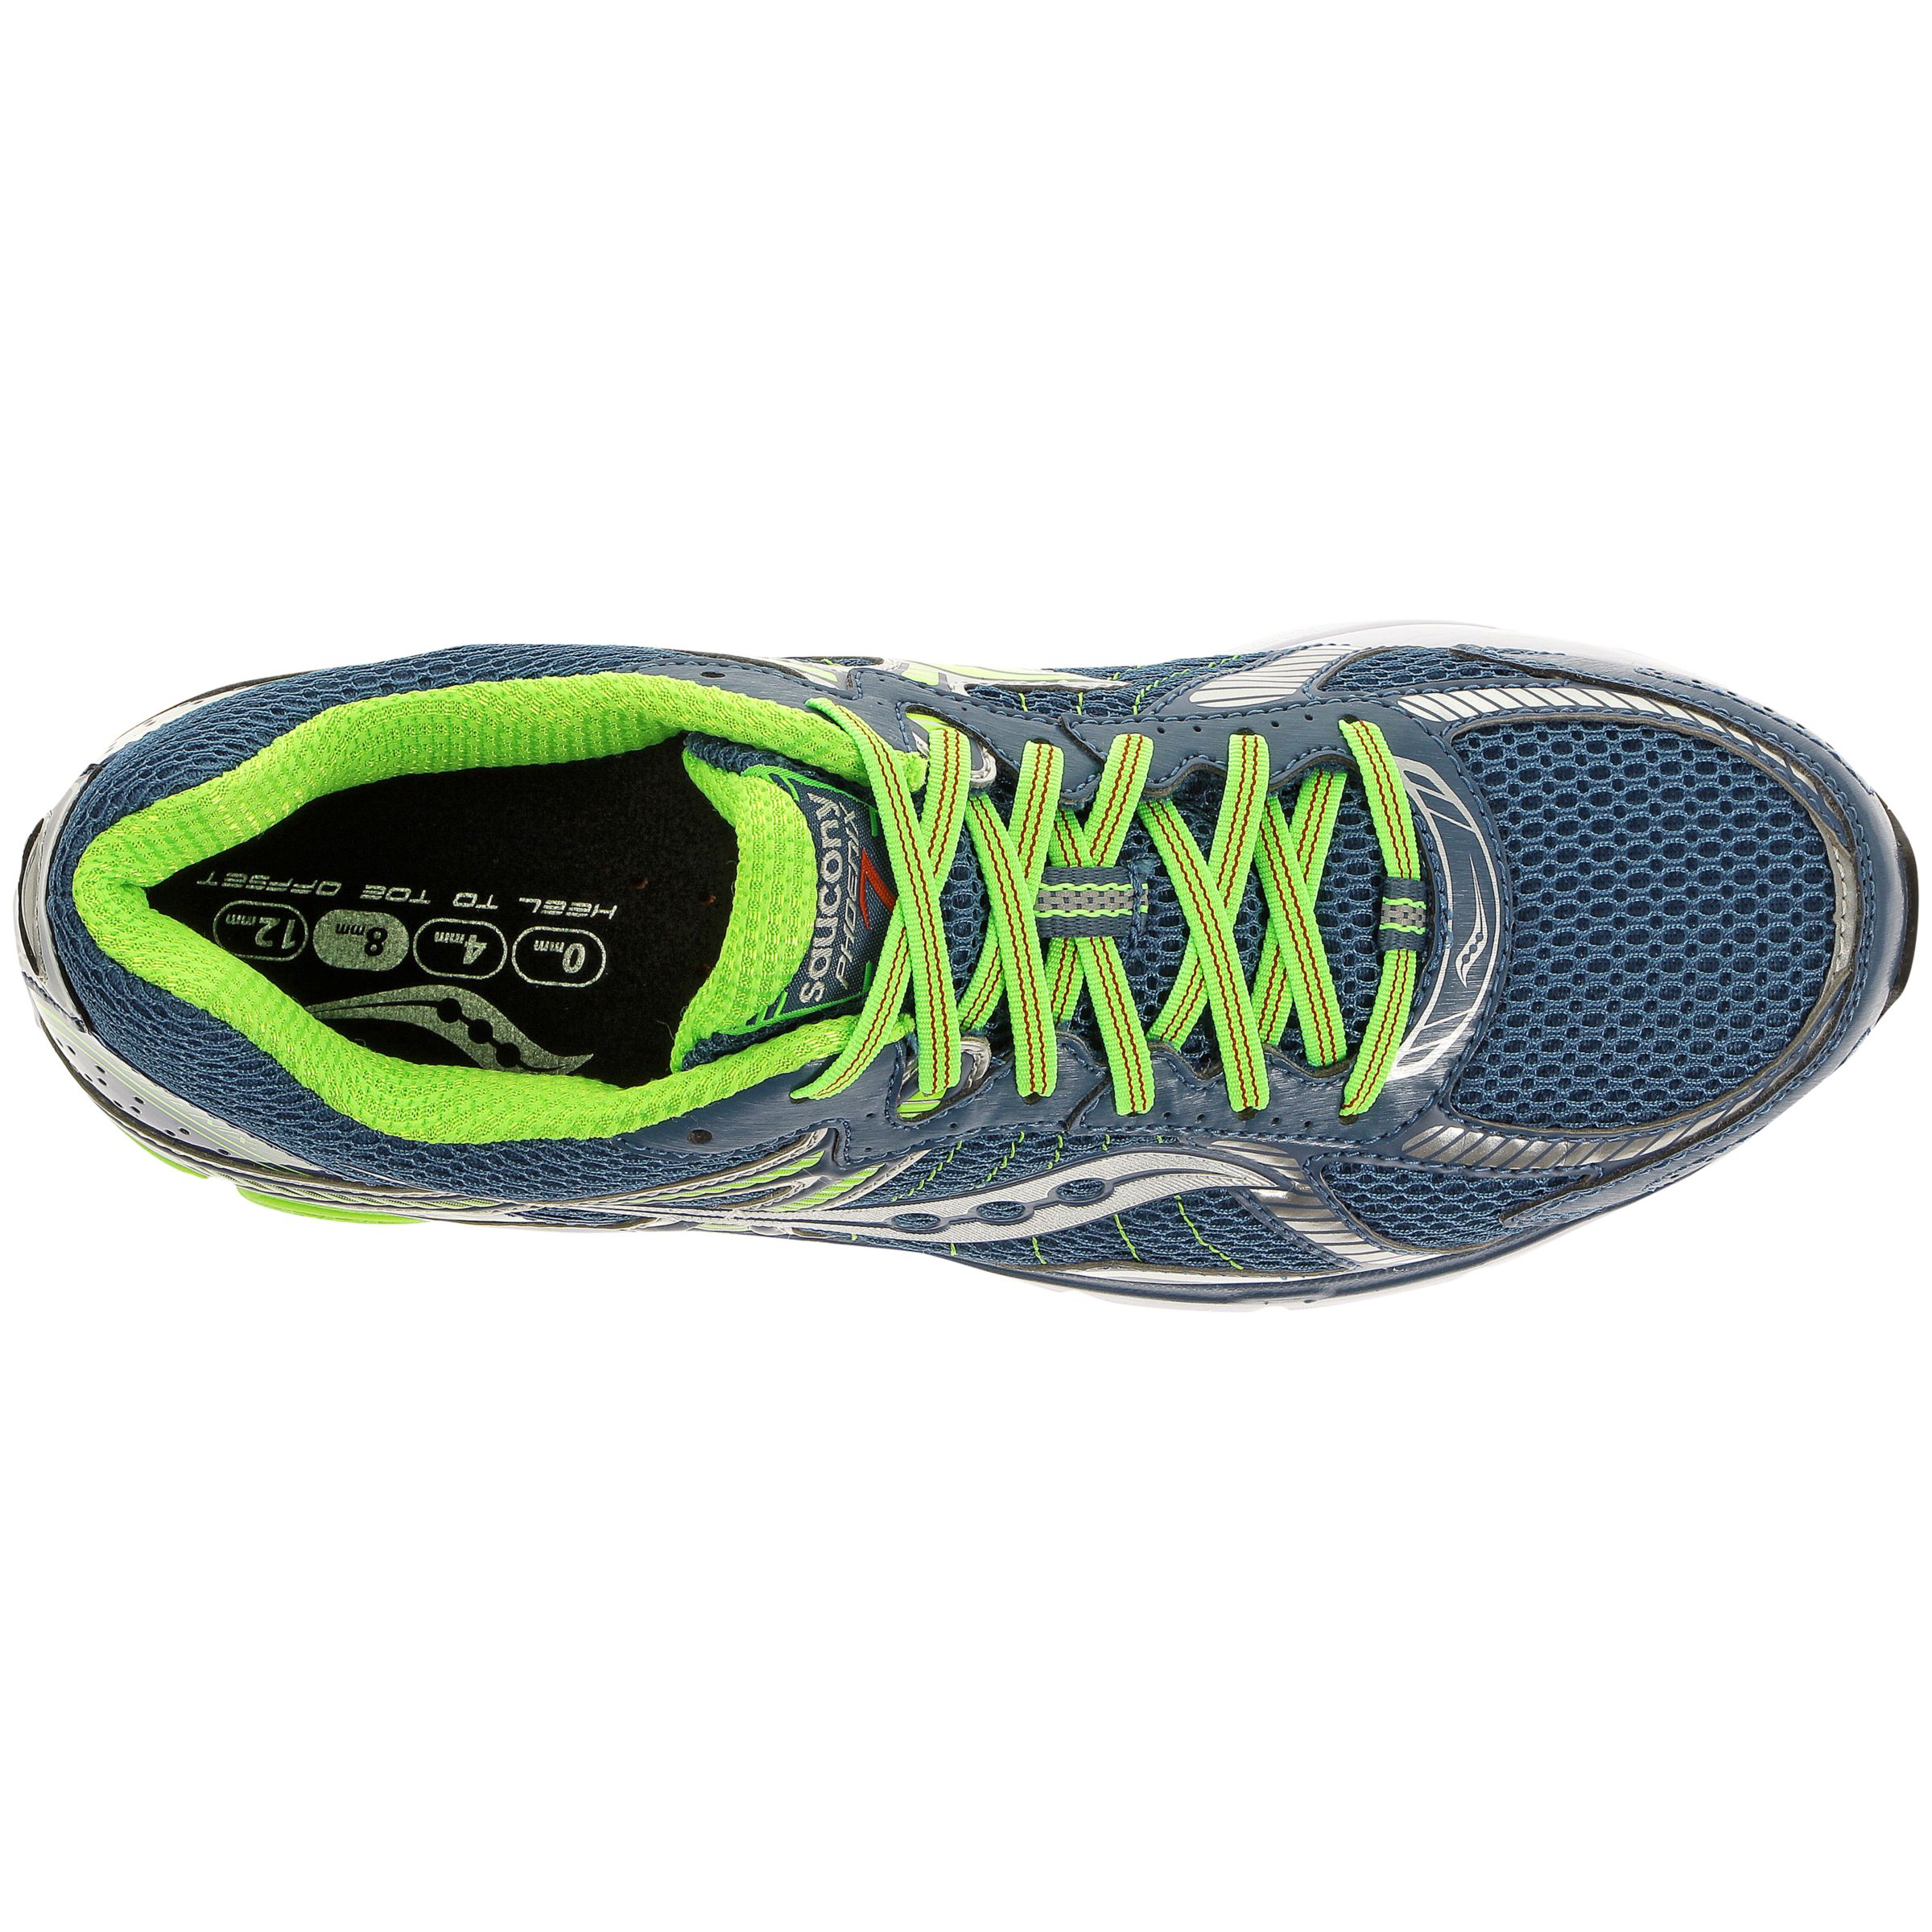 saucony phoenix 7 running shoes review